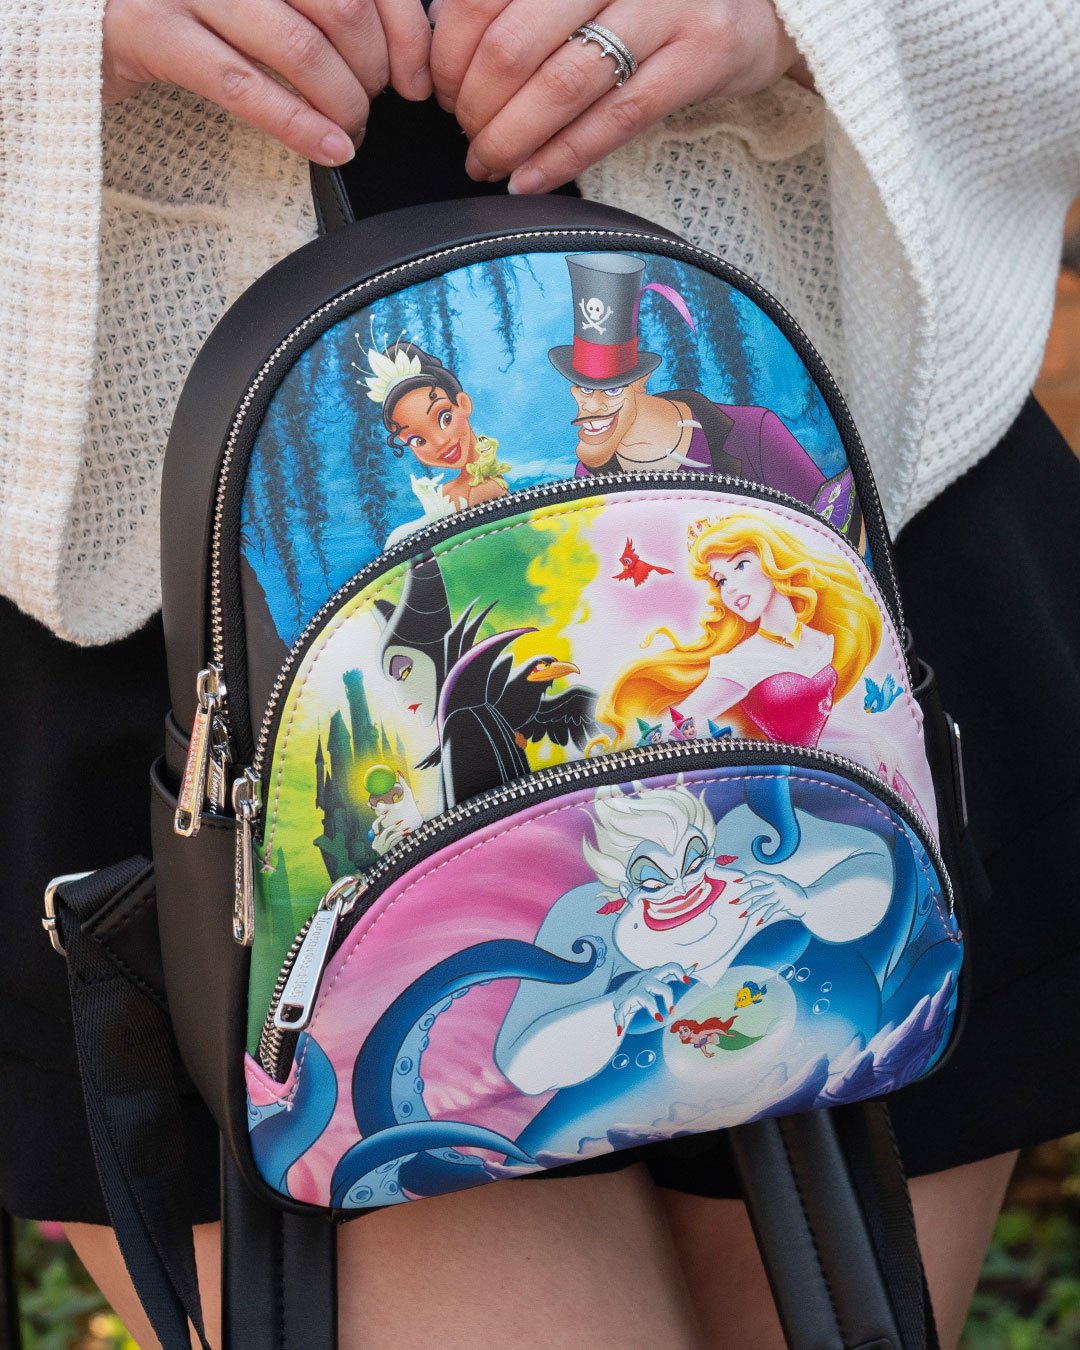 Loungefly Disney Princesses vs Villains Triple Pocket Mini Backpack - 707 Street Exclusive - Girl holding Loungefly backpack